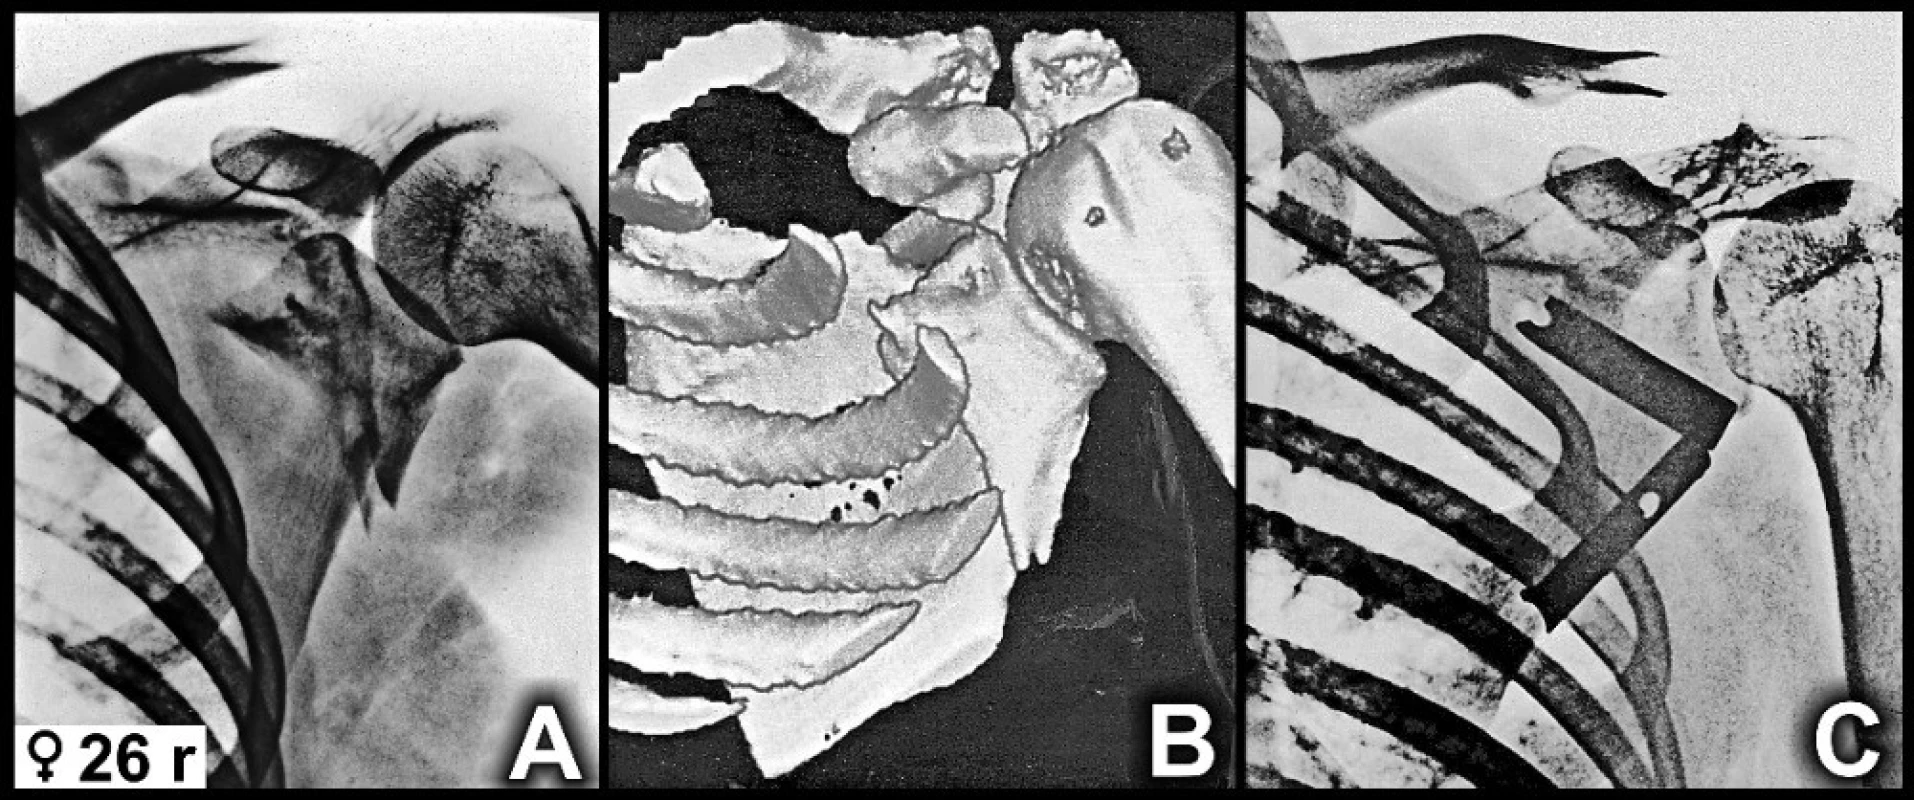  A – preoperative radiograph; B – preoperative 3D CT reconstruction; C – radiograph one year after the surgery